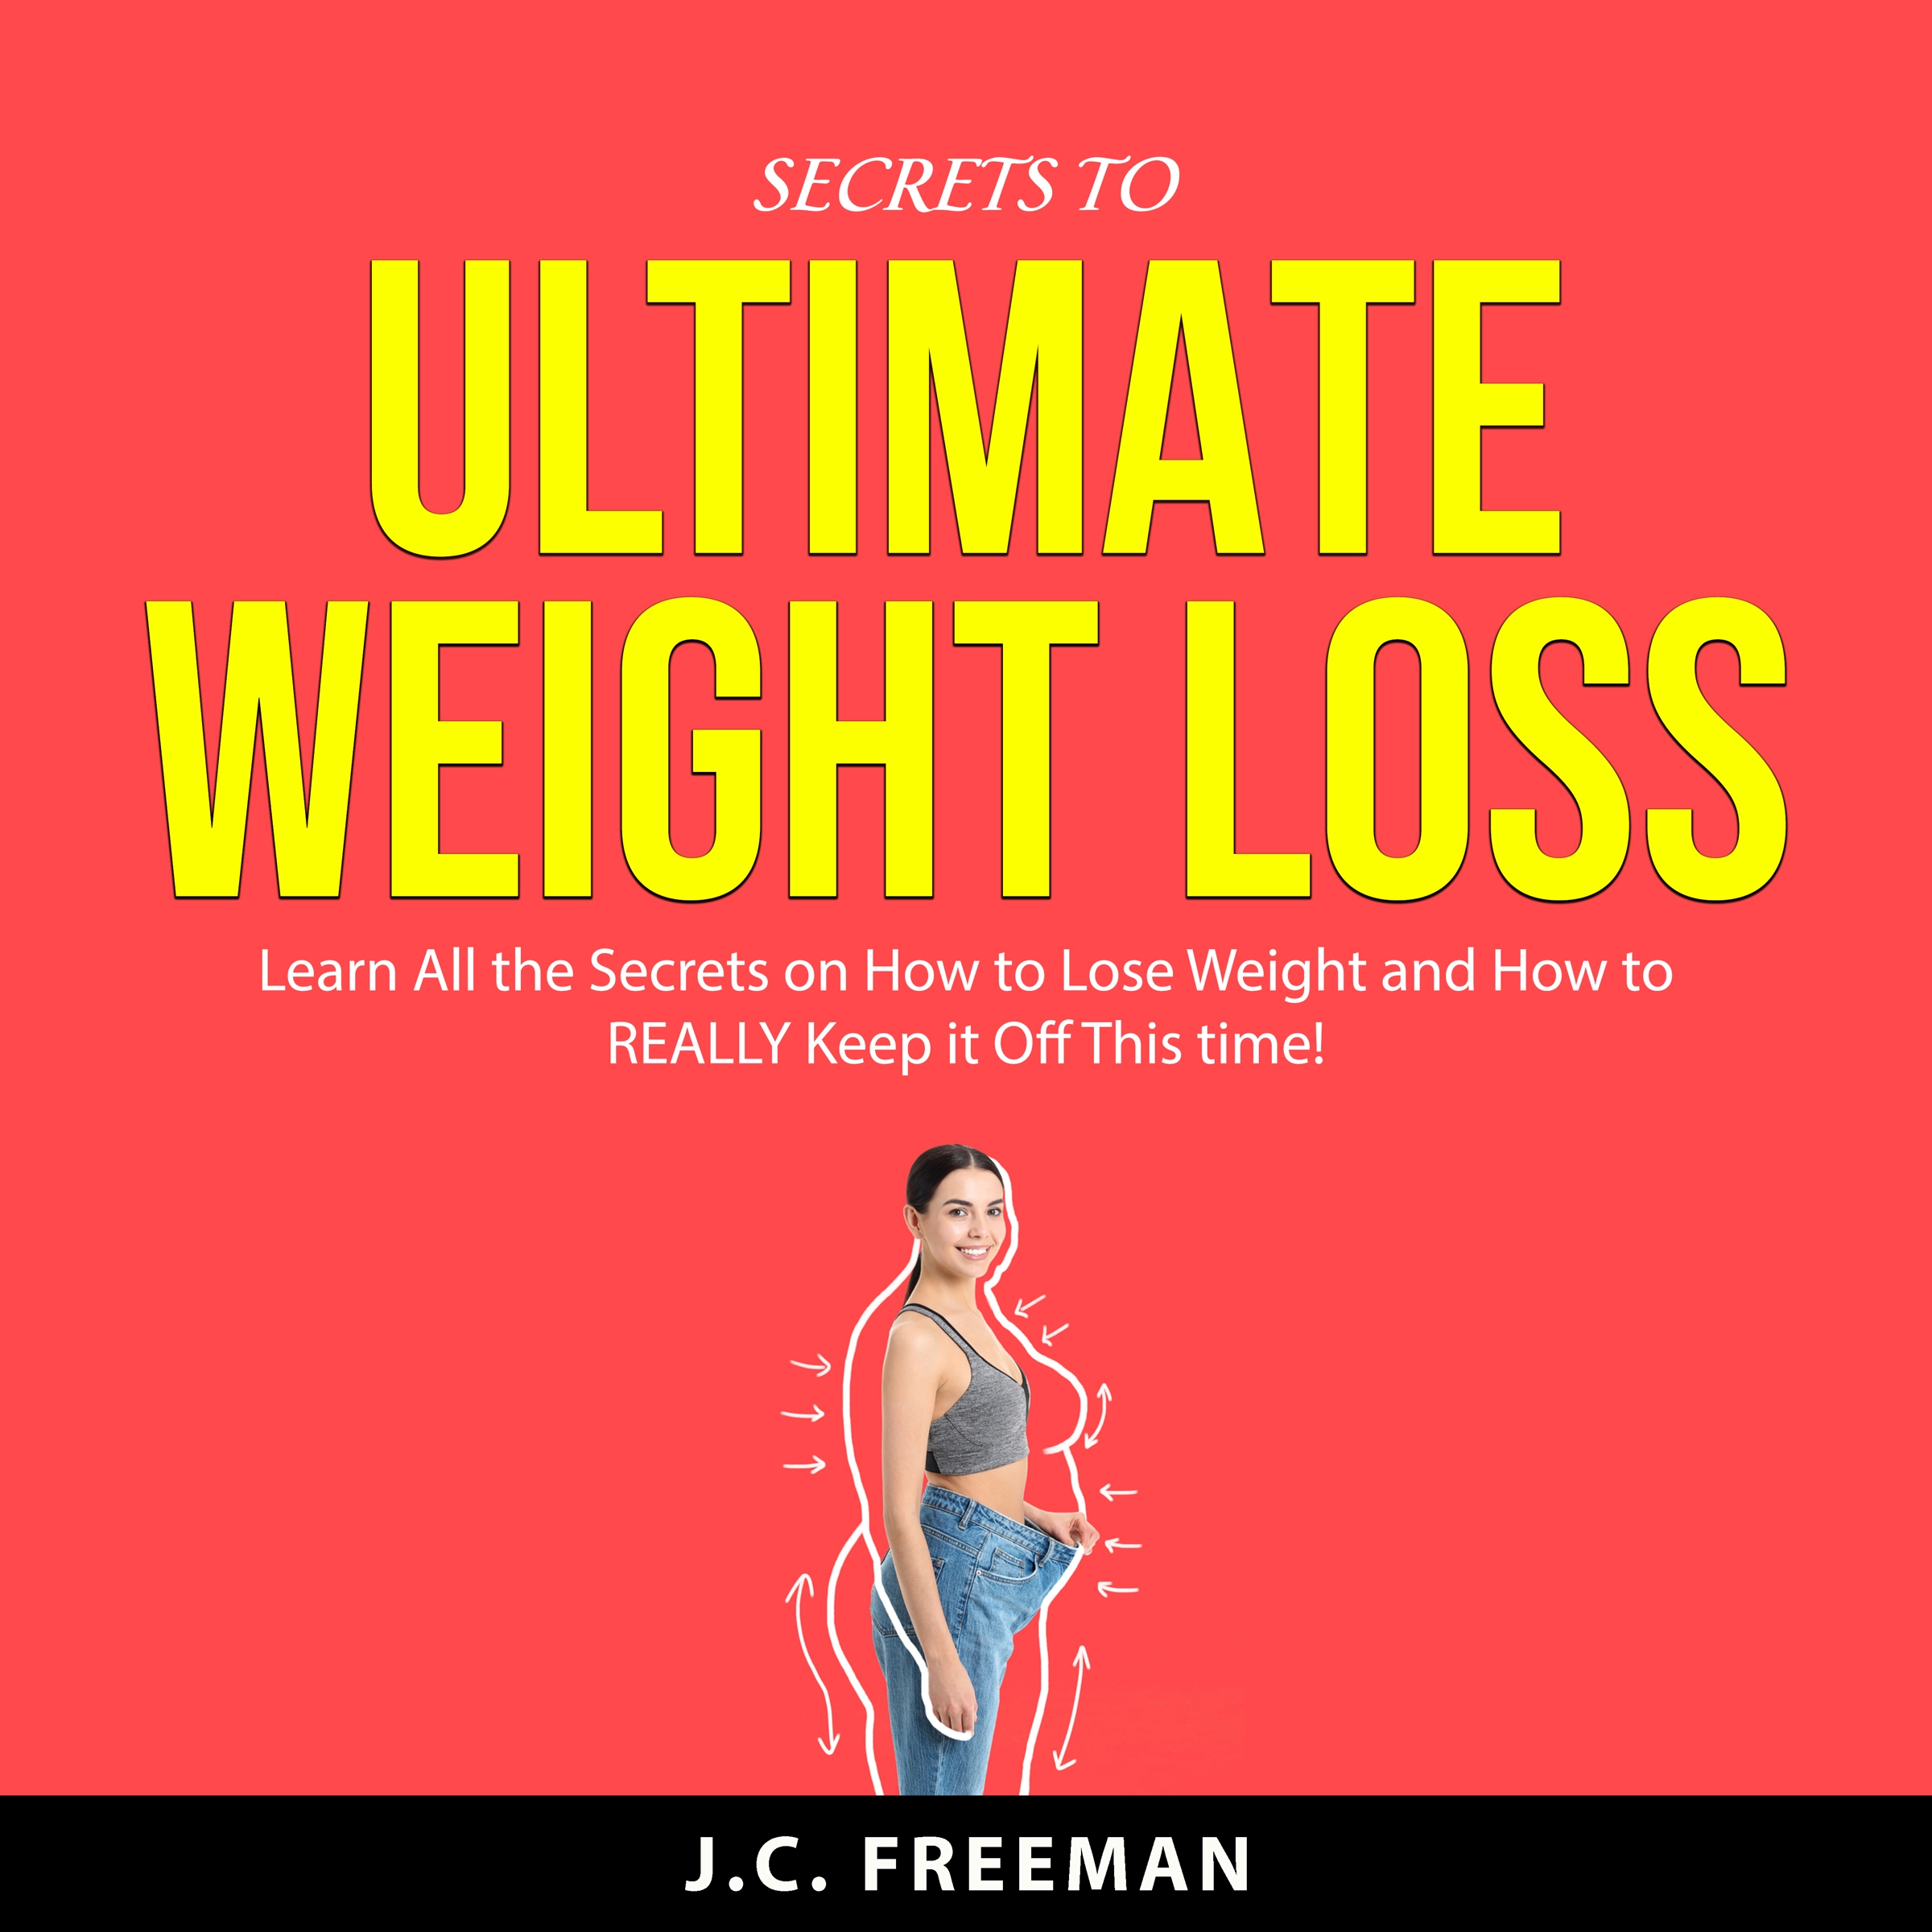 Secrets to Ultimate Weight Loss Audiobook by J.C. Freeman